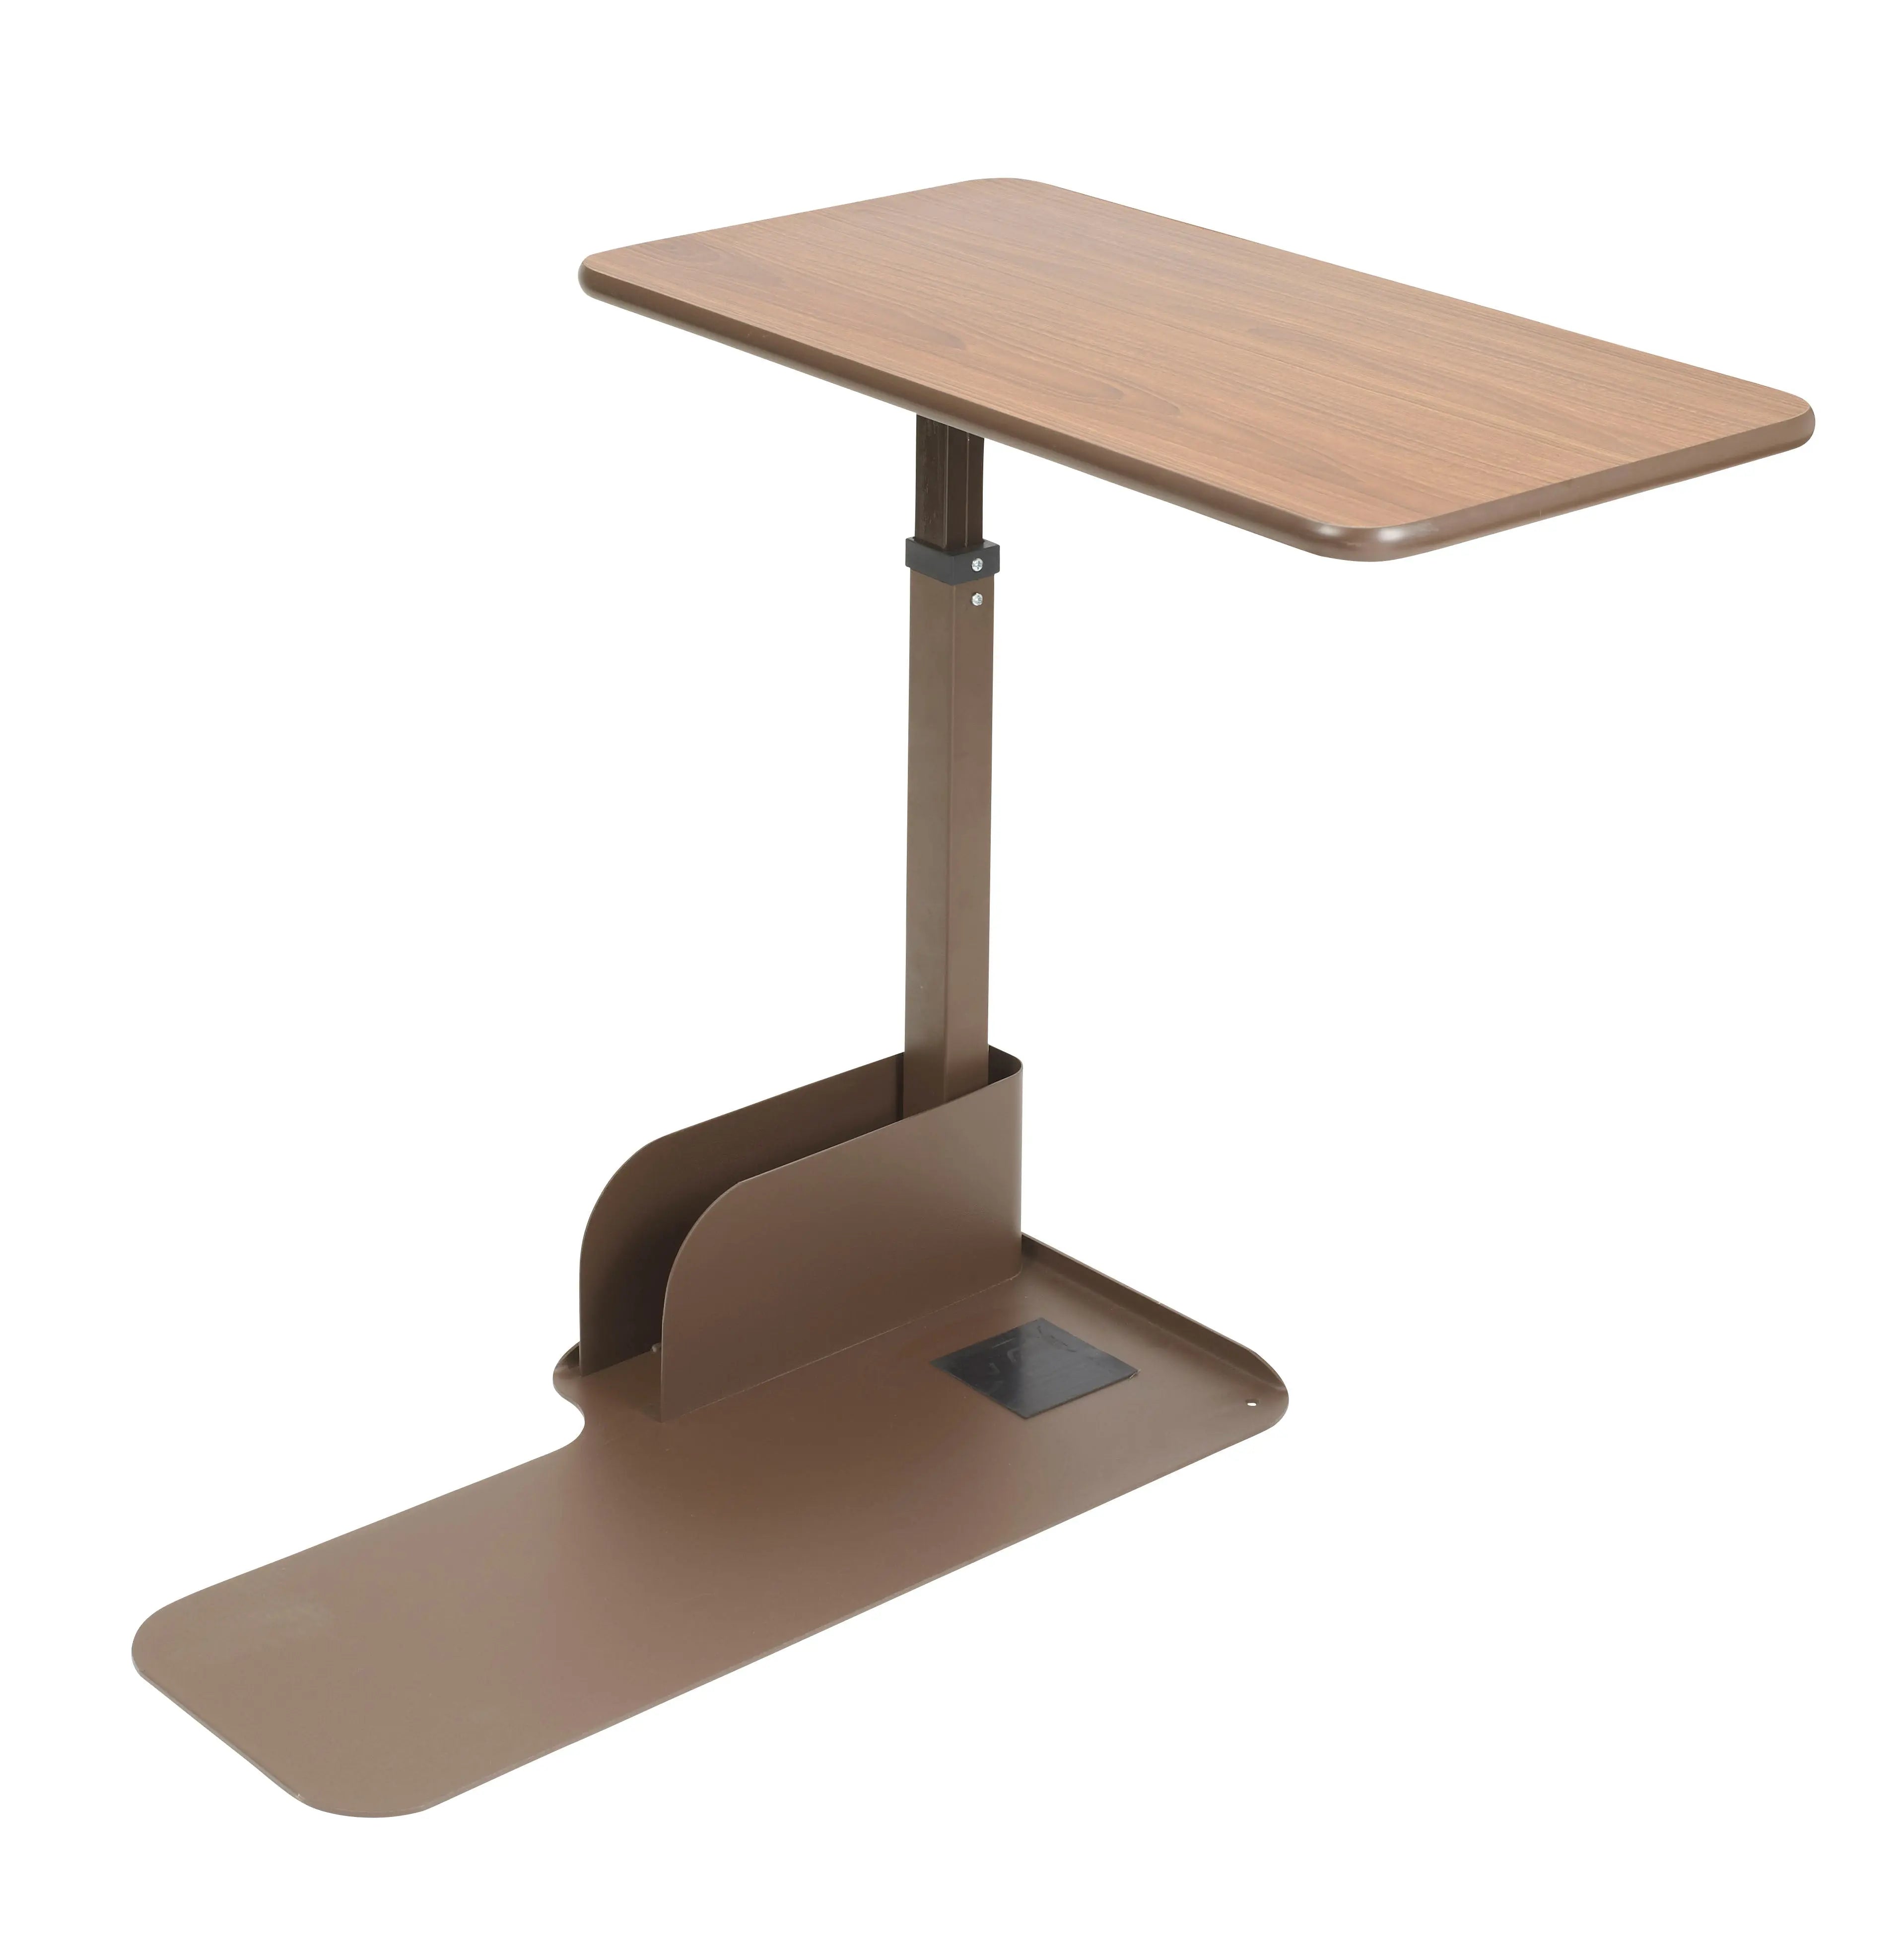 Seat Lift Chair Overbed Table